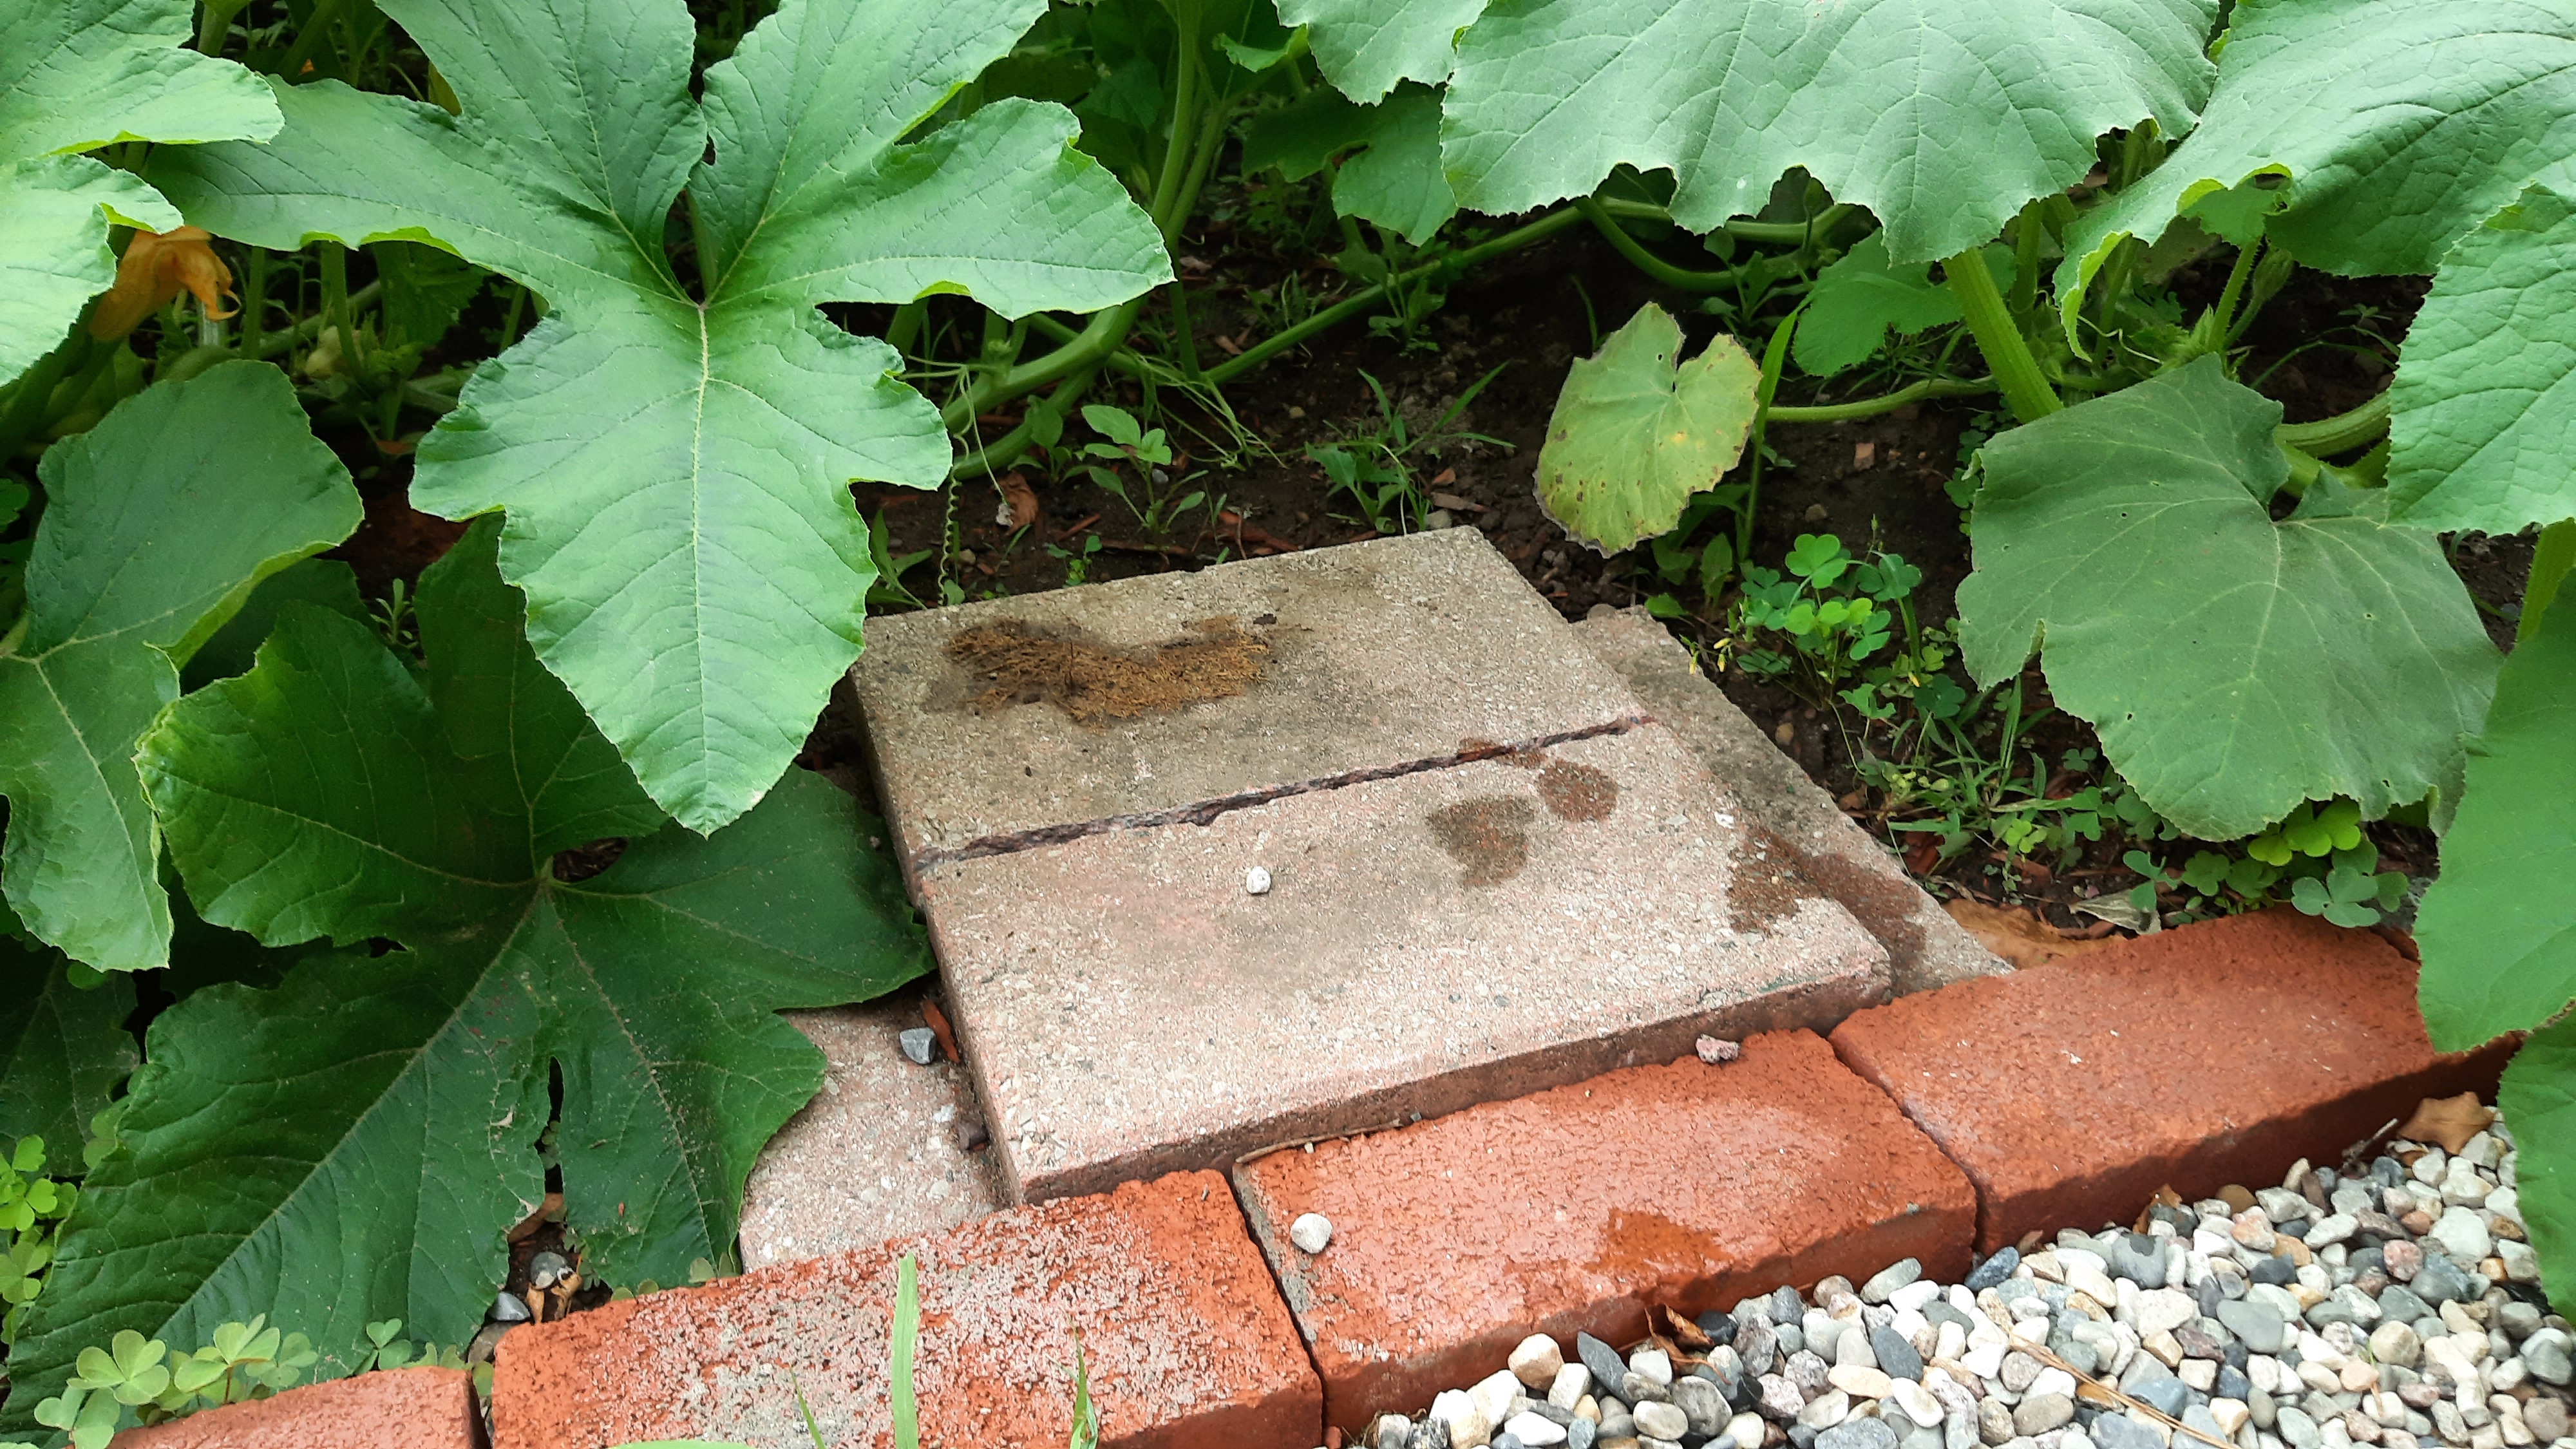 bricks used to make a small shelter in a garden for frogs or snakes